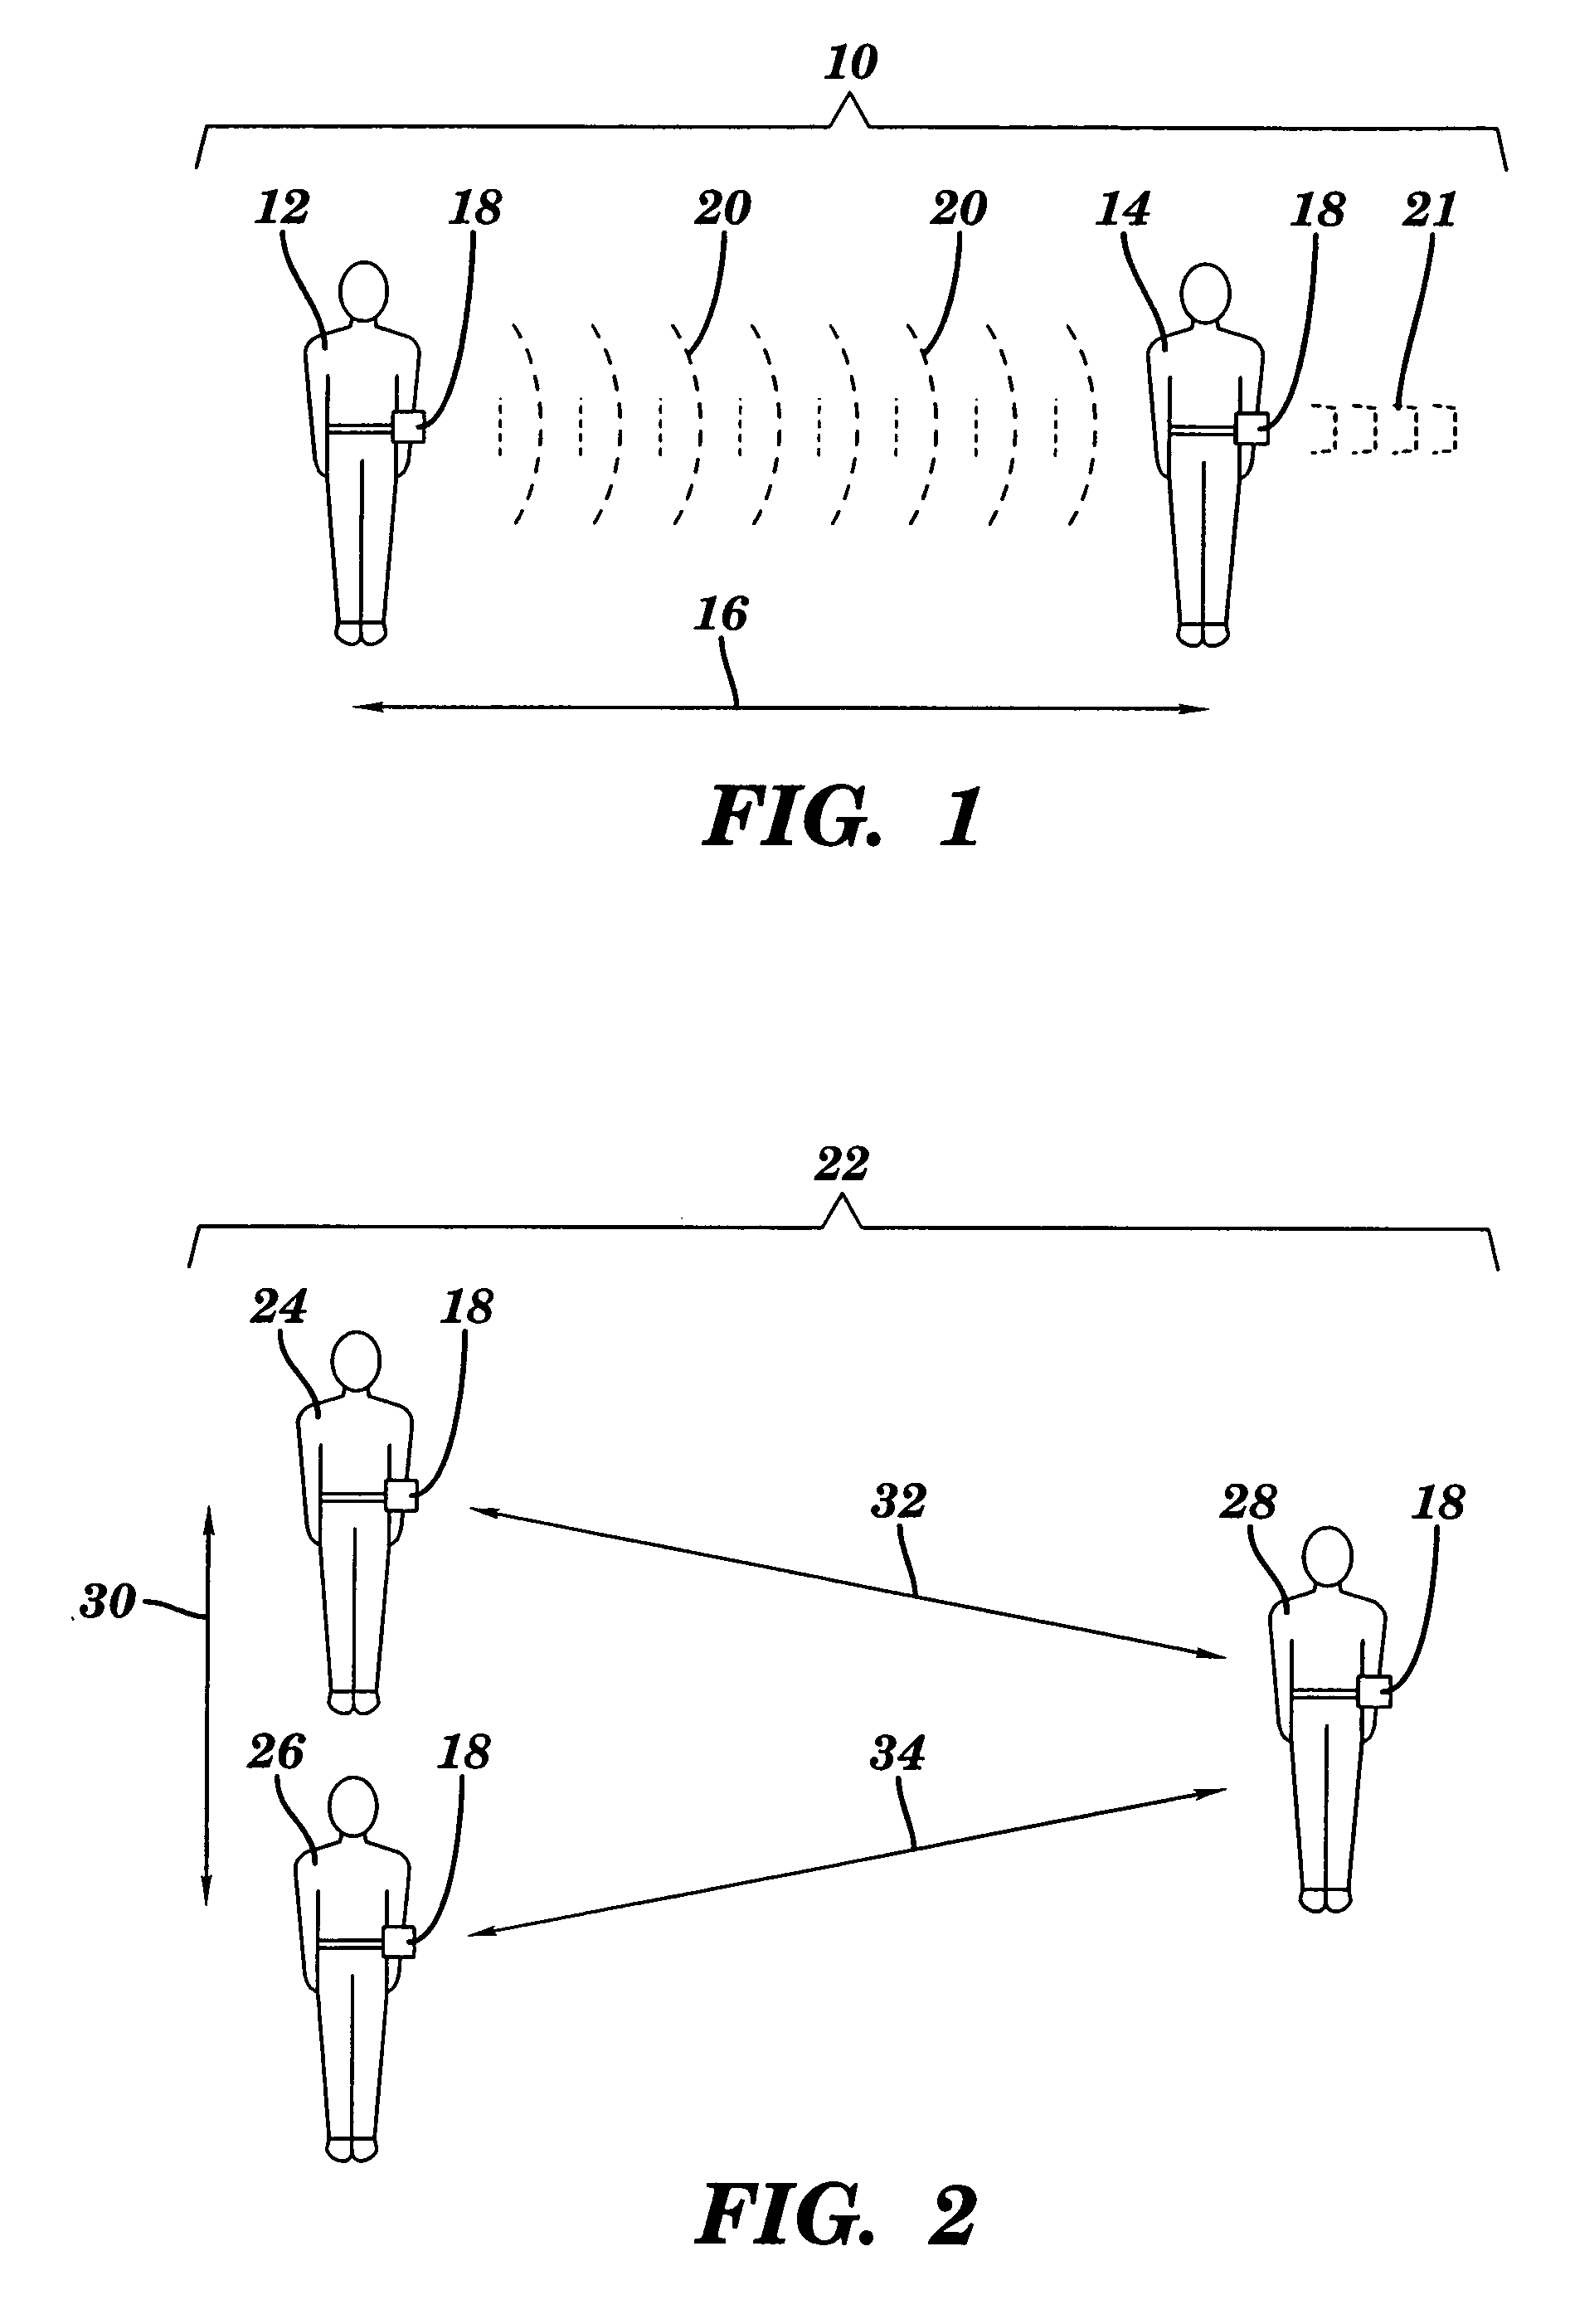 Methods and devices for monitoring the distance between members of a group